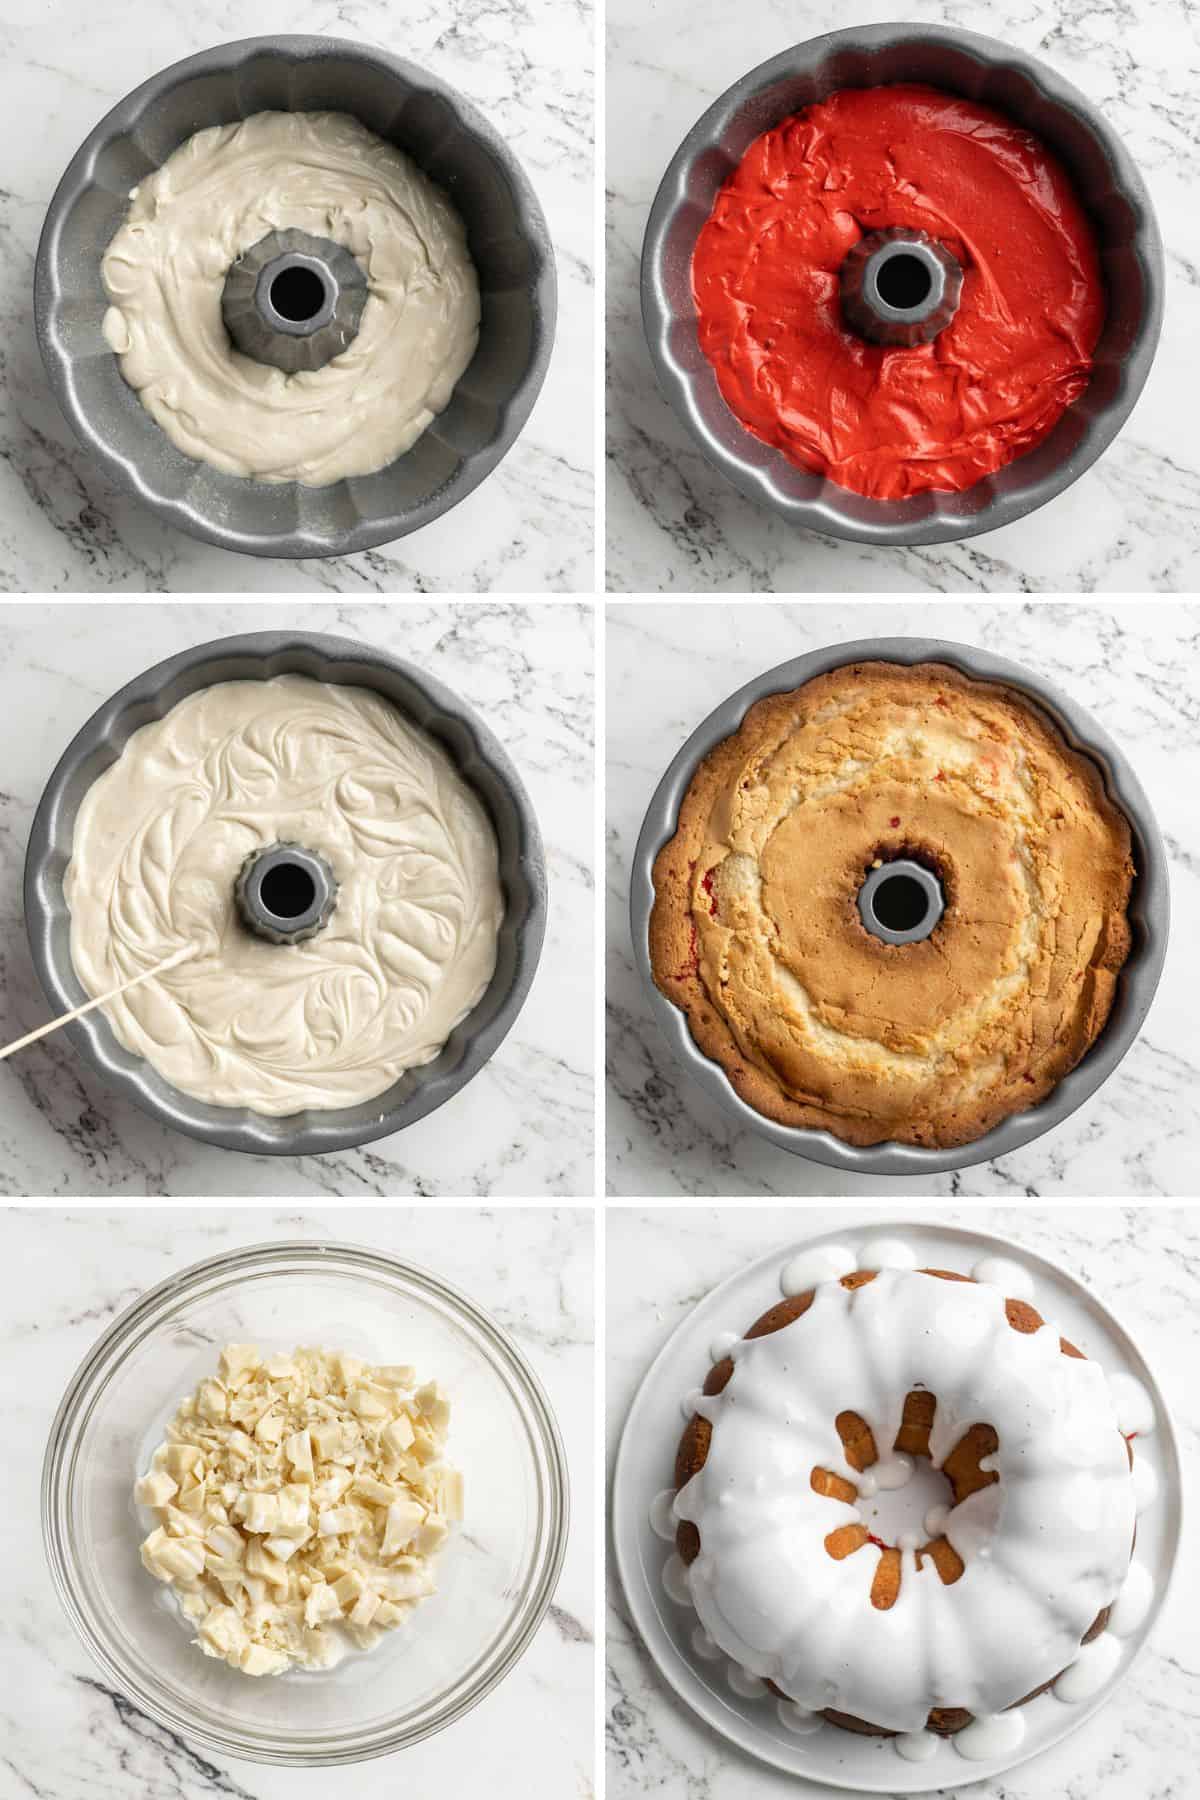 Collage of steps for layering, baking and garnishing the white chocolate raspberry bundt cake